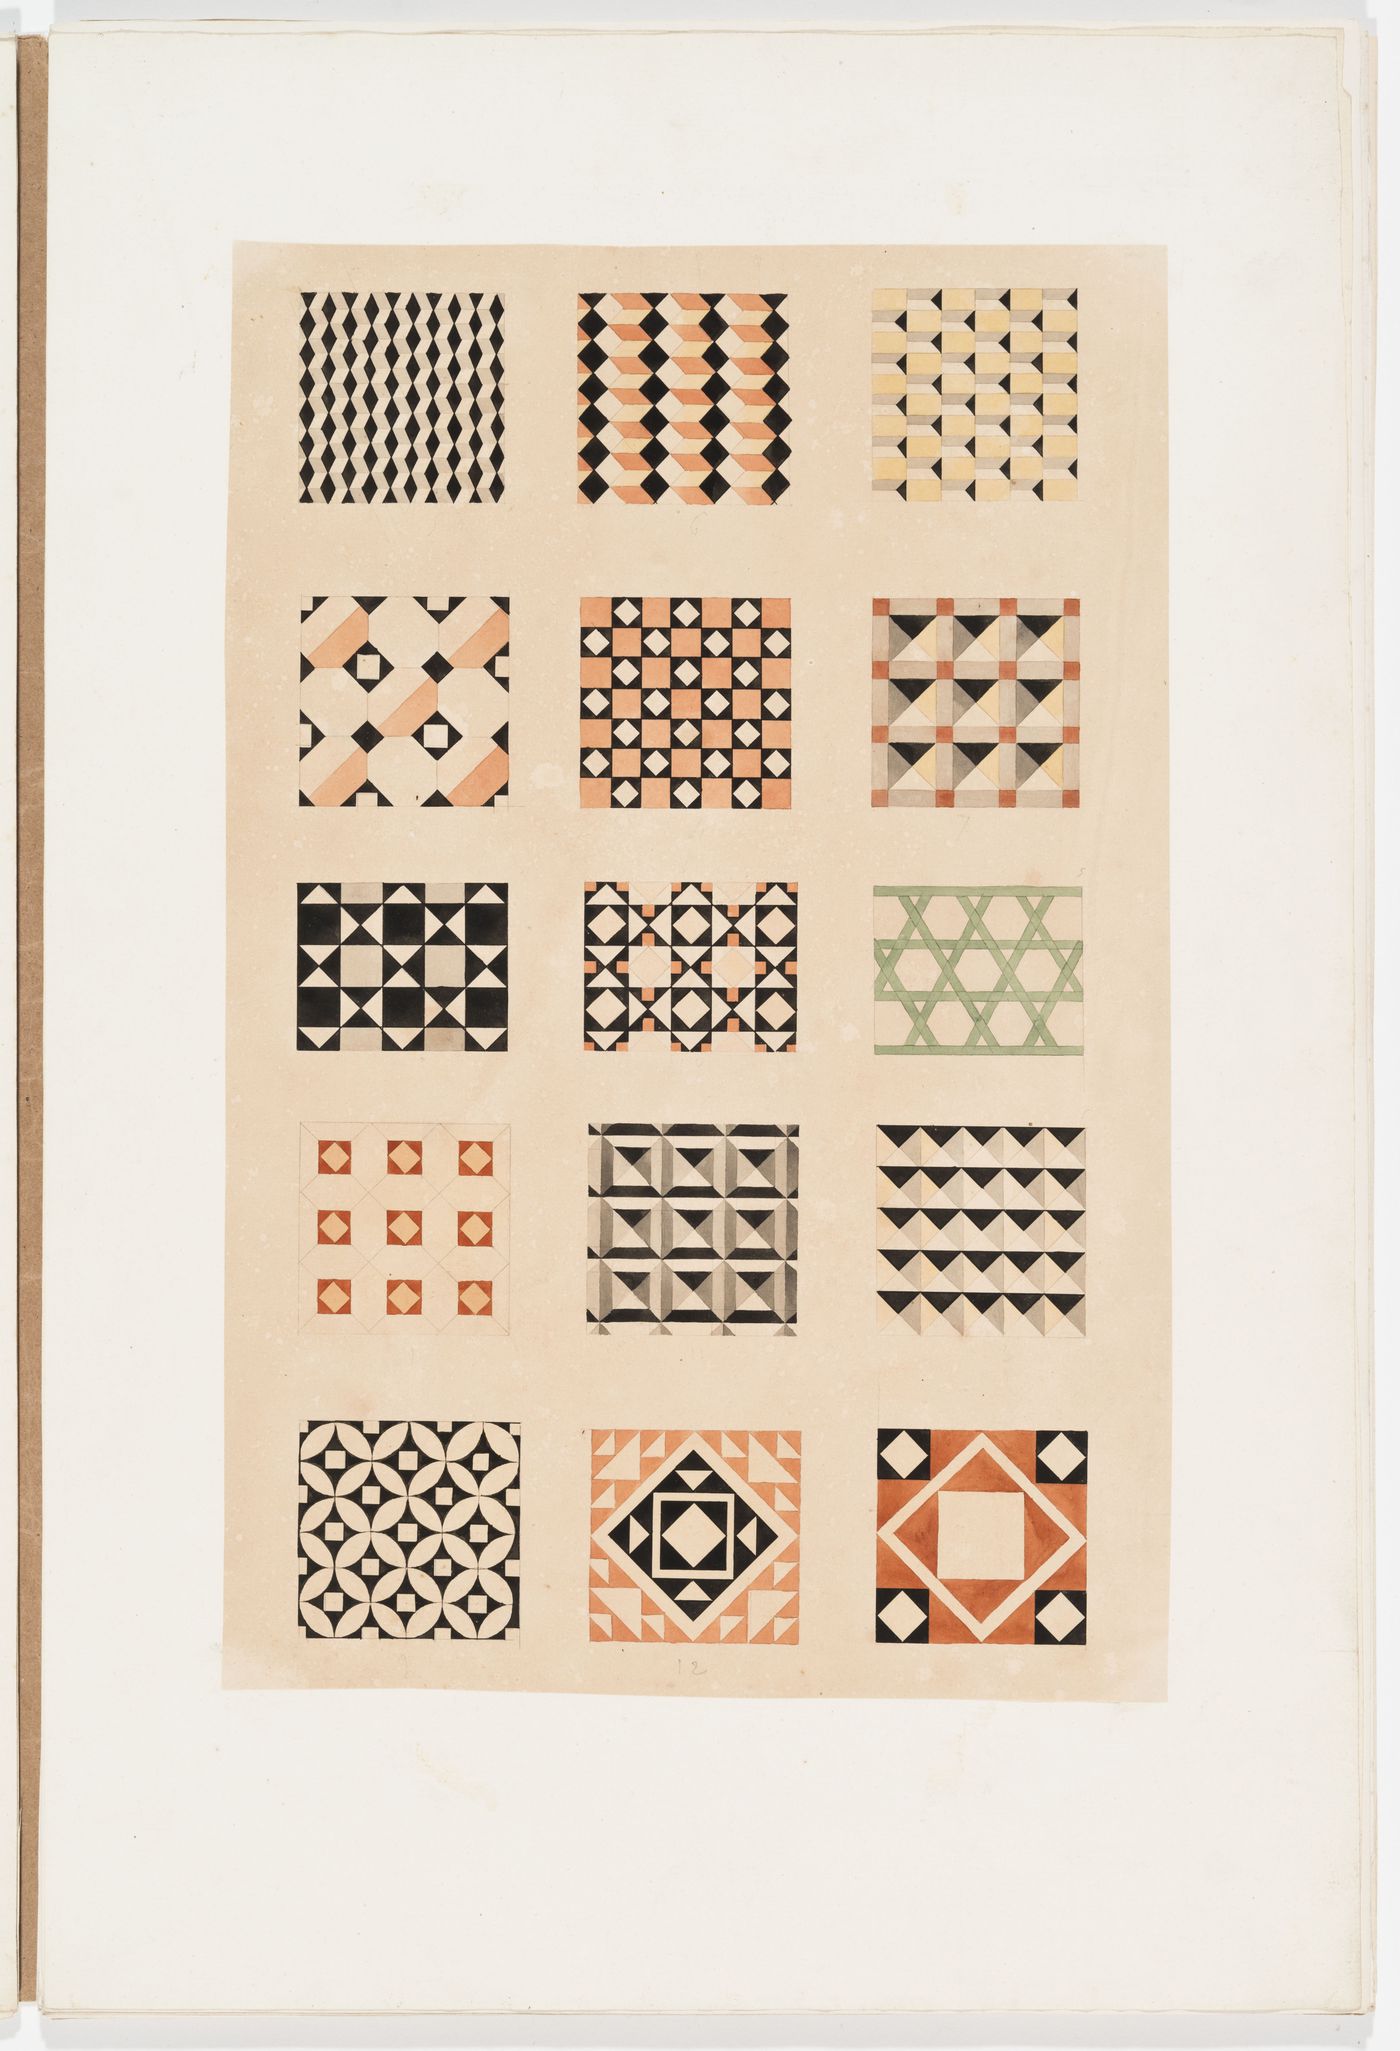 Ornament drawing of fifteen geometric patterns, probably floor tiles